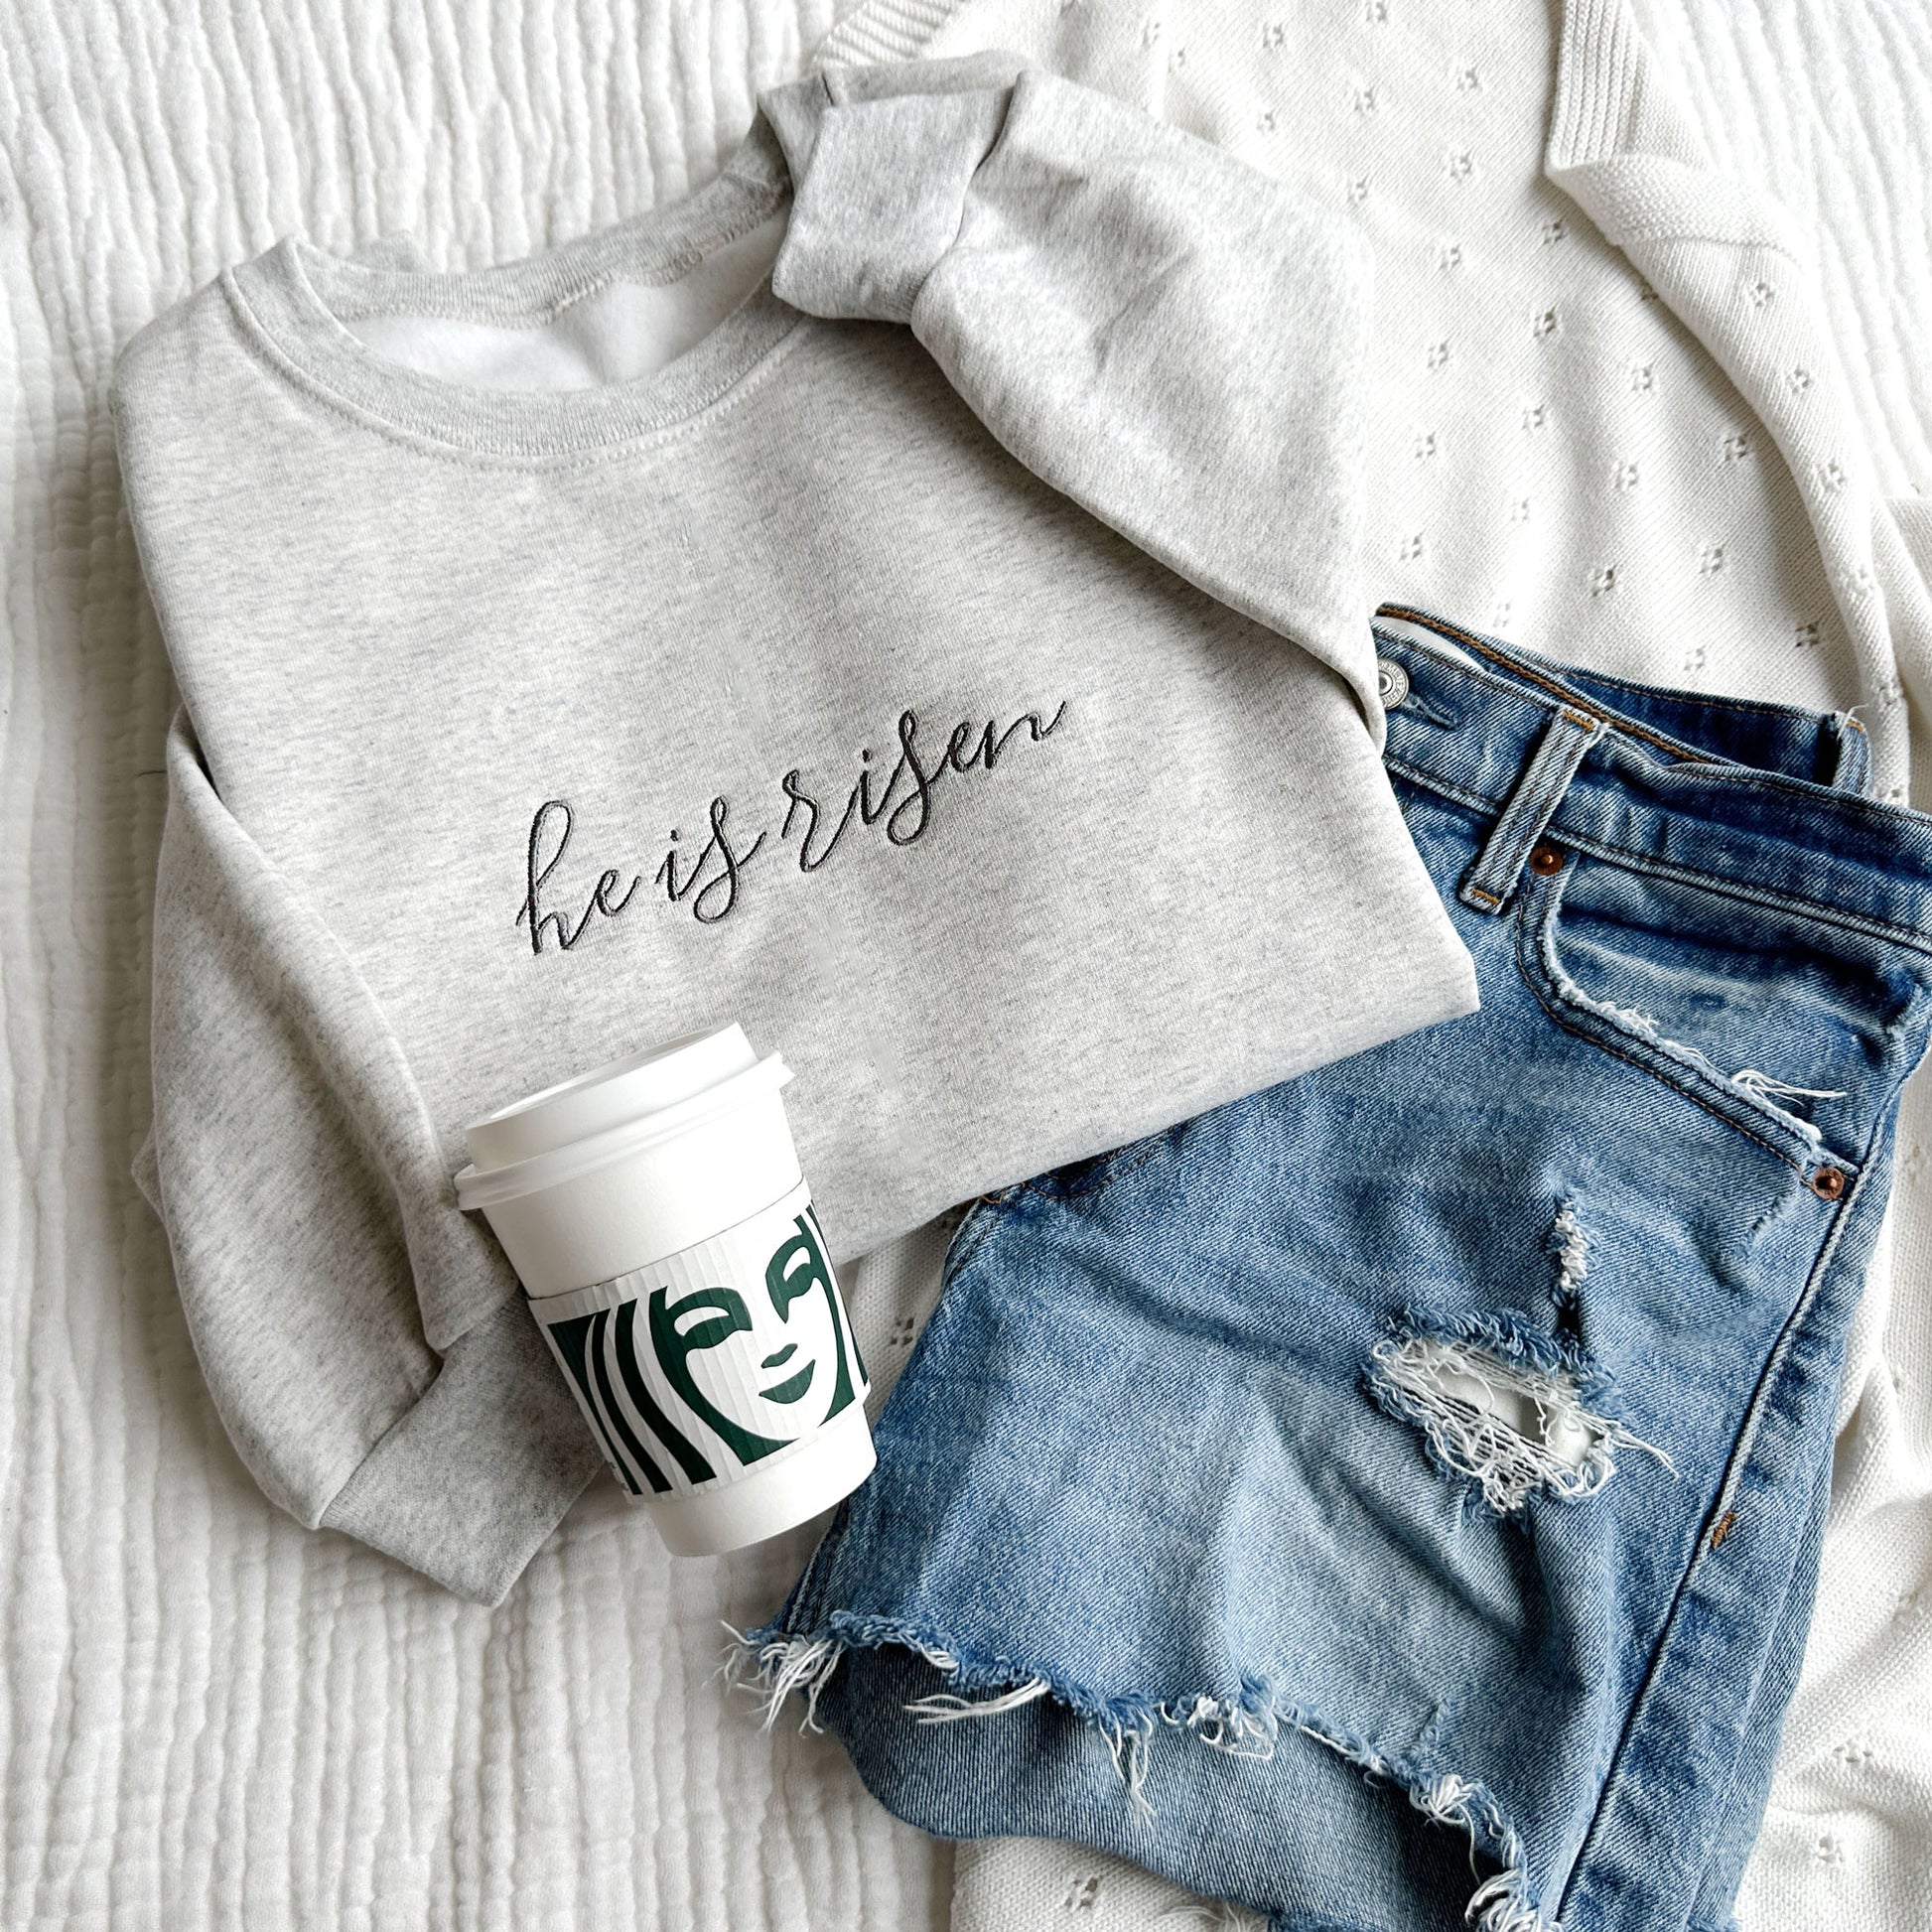 Embroidered Ash crewneck sweatshirt with he is risen embroidered in a script font and gray thread, styled with a Starbucks cup and jean shorts